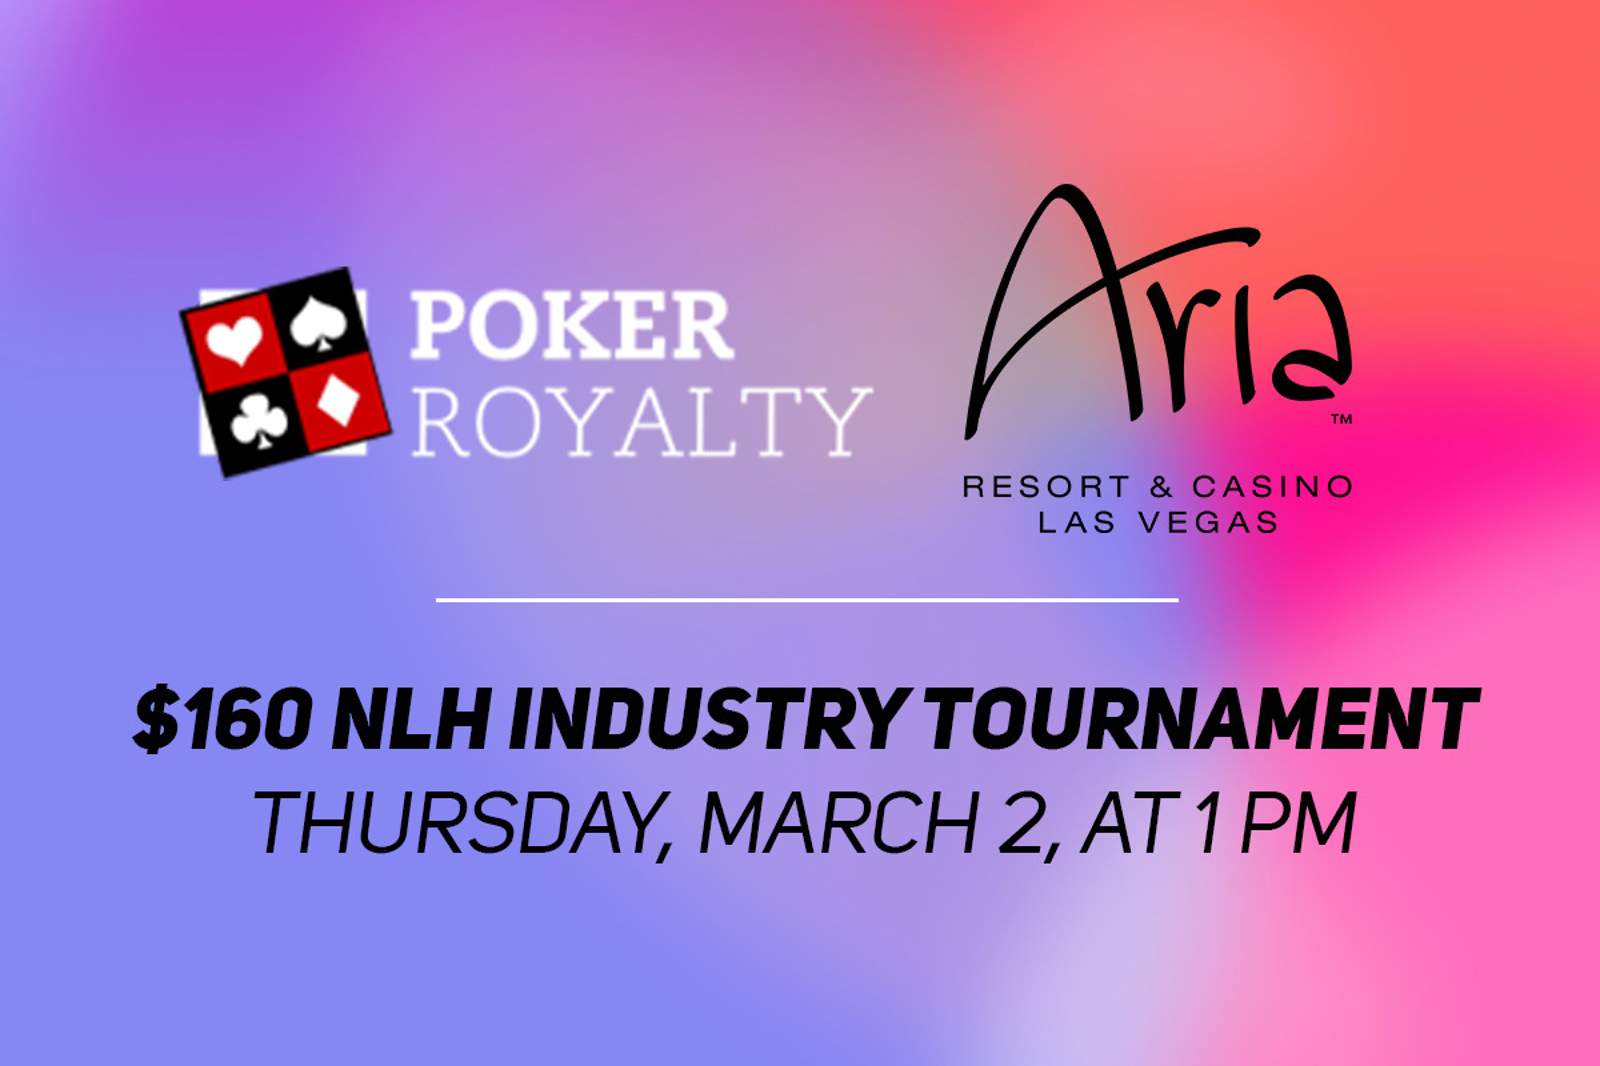 Poker Royalty Presents Monthly Industry Tournament